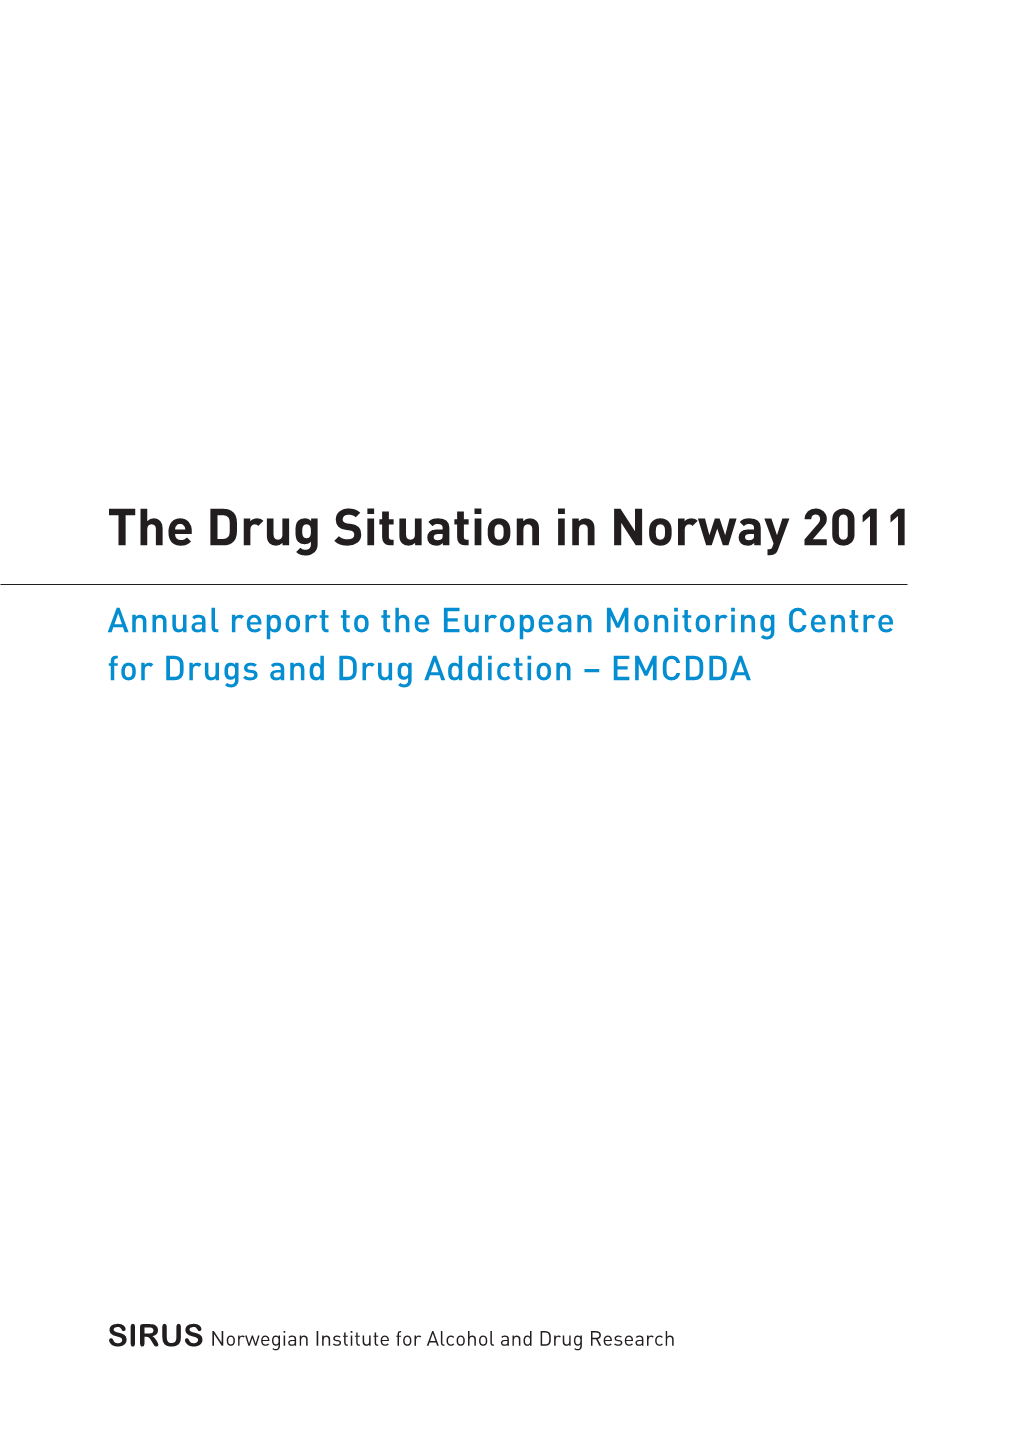 The Drug Situation in Norway 2011